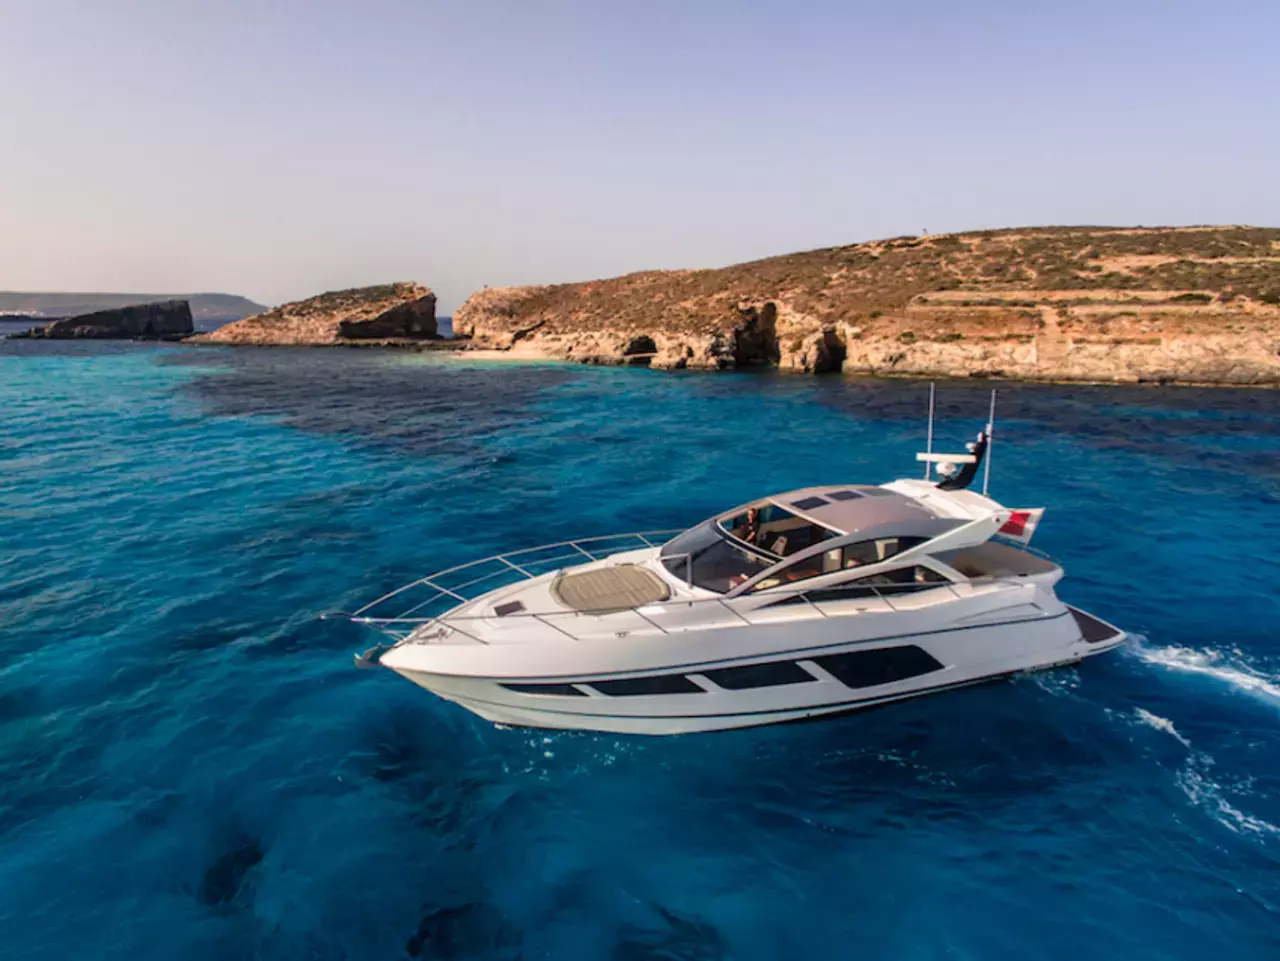 Jee-Jam by Sunseeker - Top rates for a Charter of a private Motor Yacht in Malta